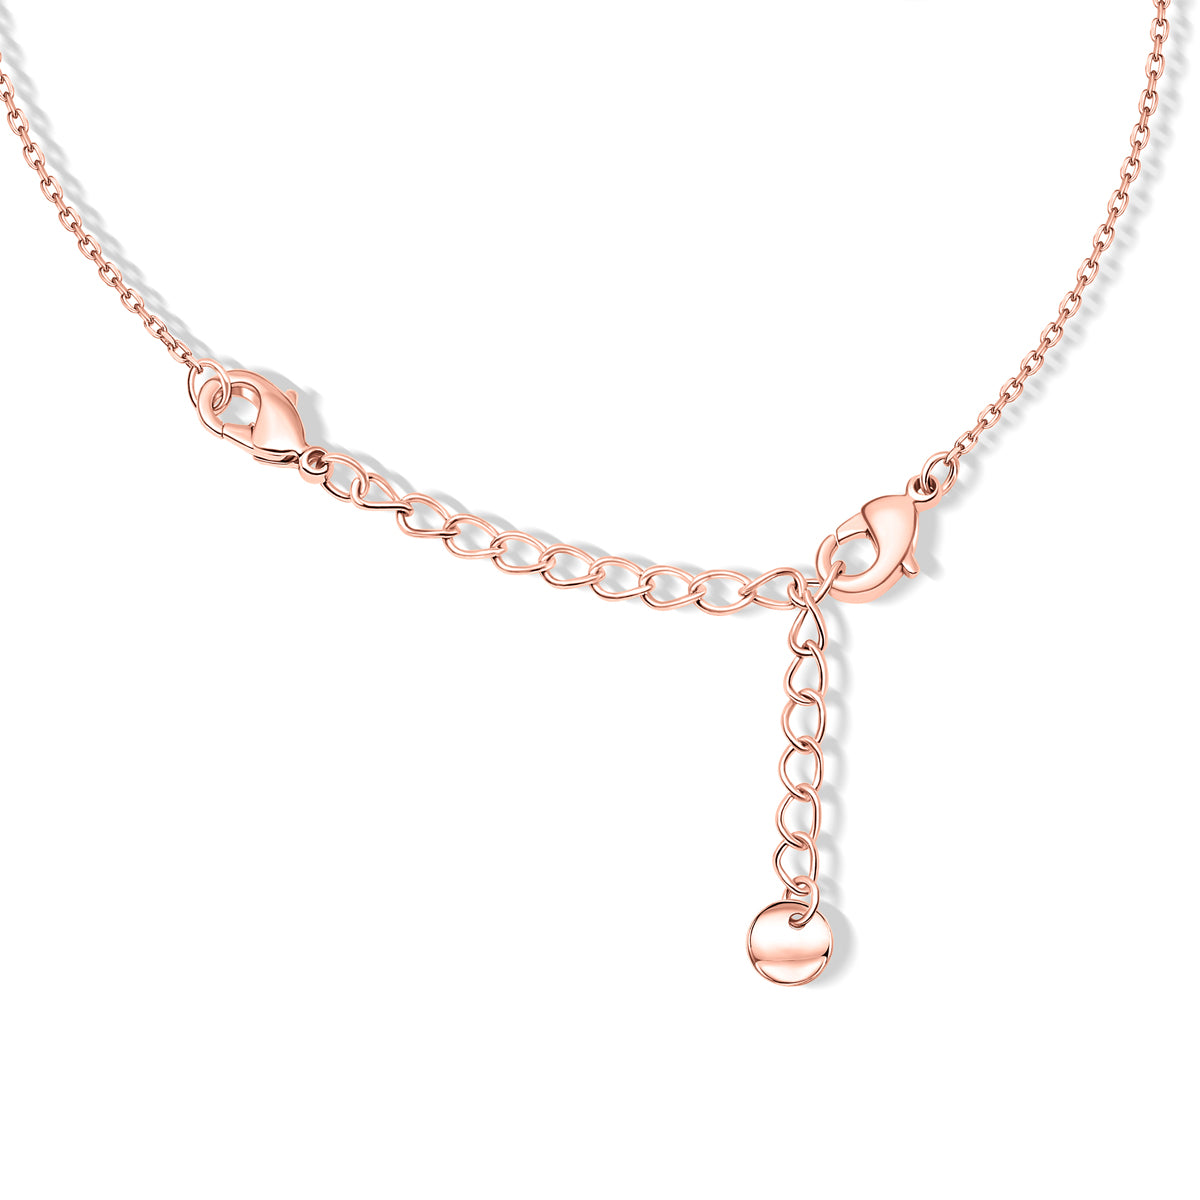 Rose gold necklace extender with lobster clasp